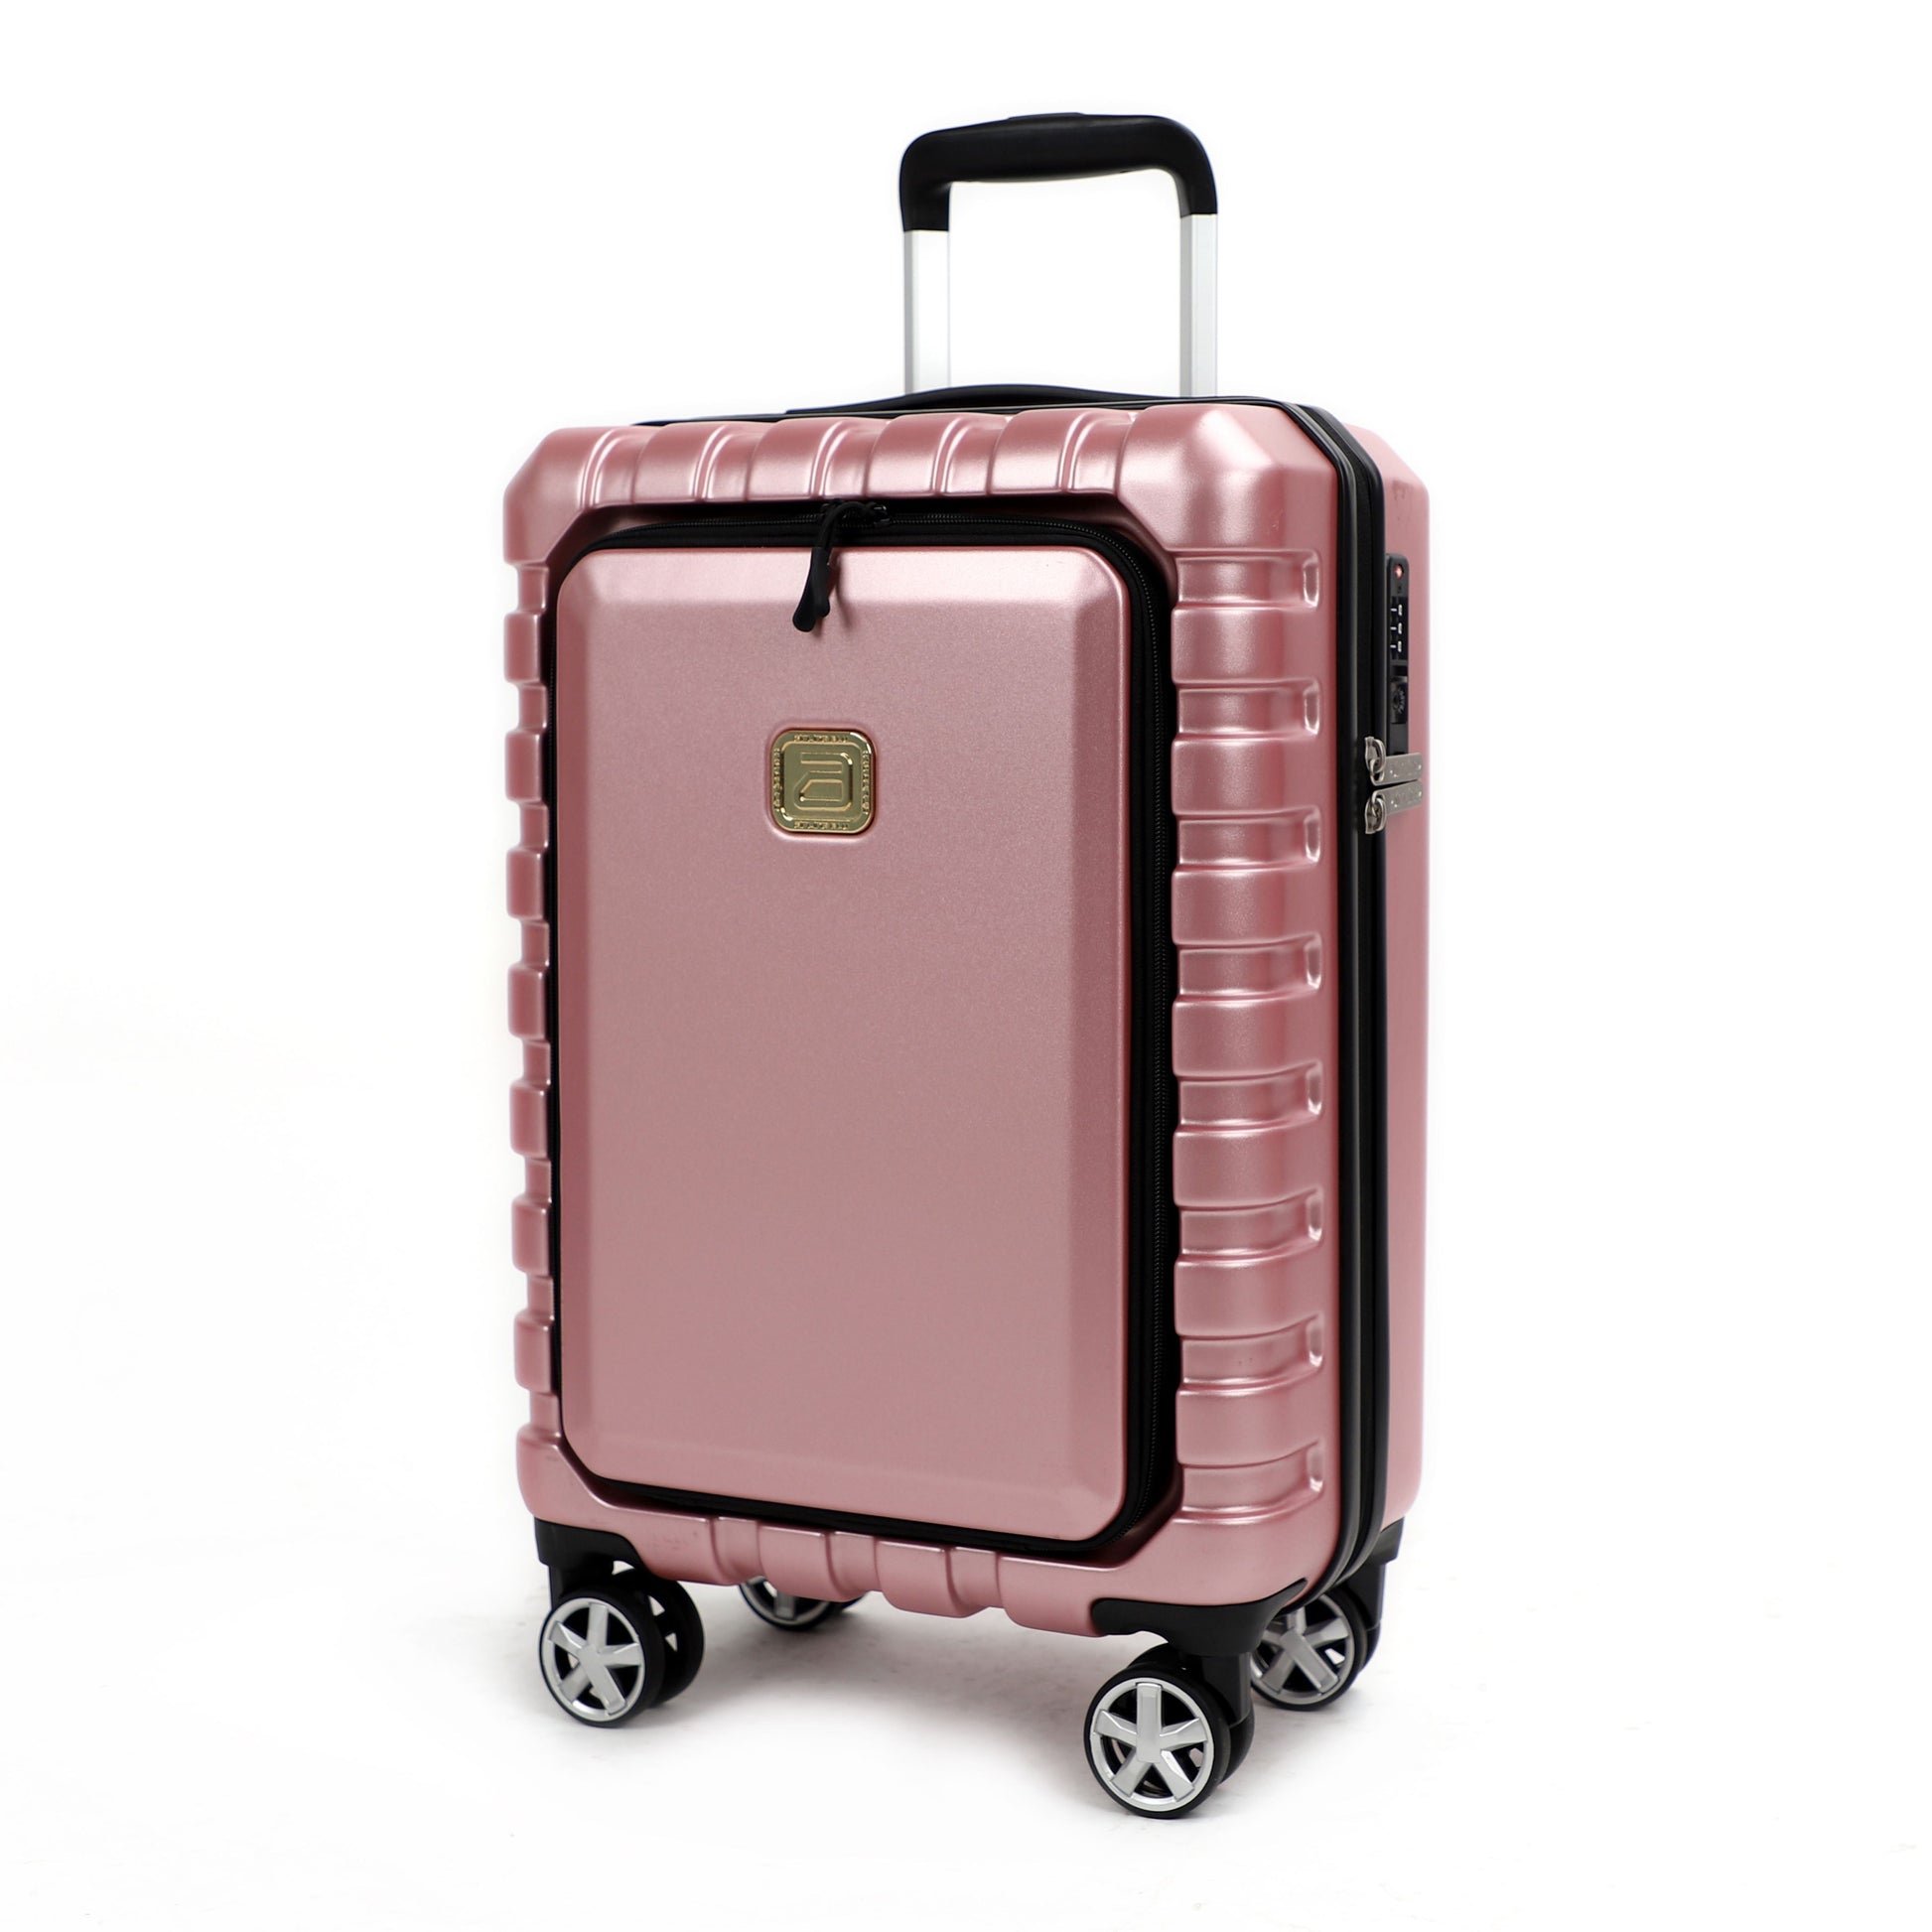 Airline_Carry_On_Luggage_Rose_Gold_Side_view_T1978155102